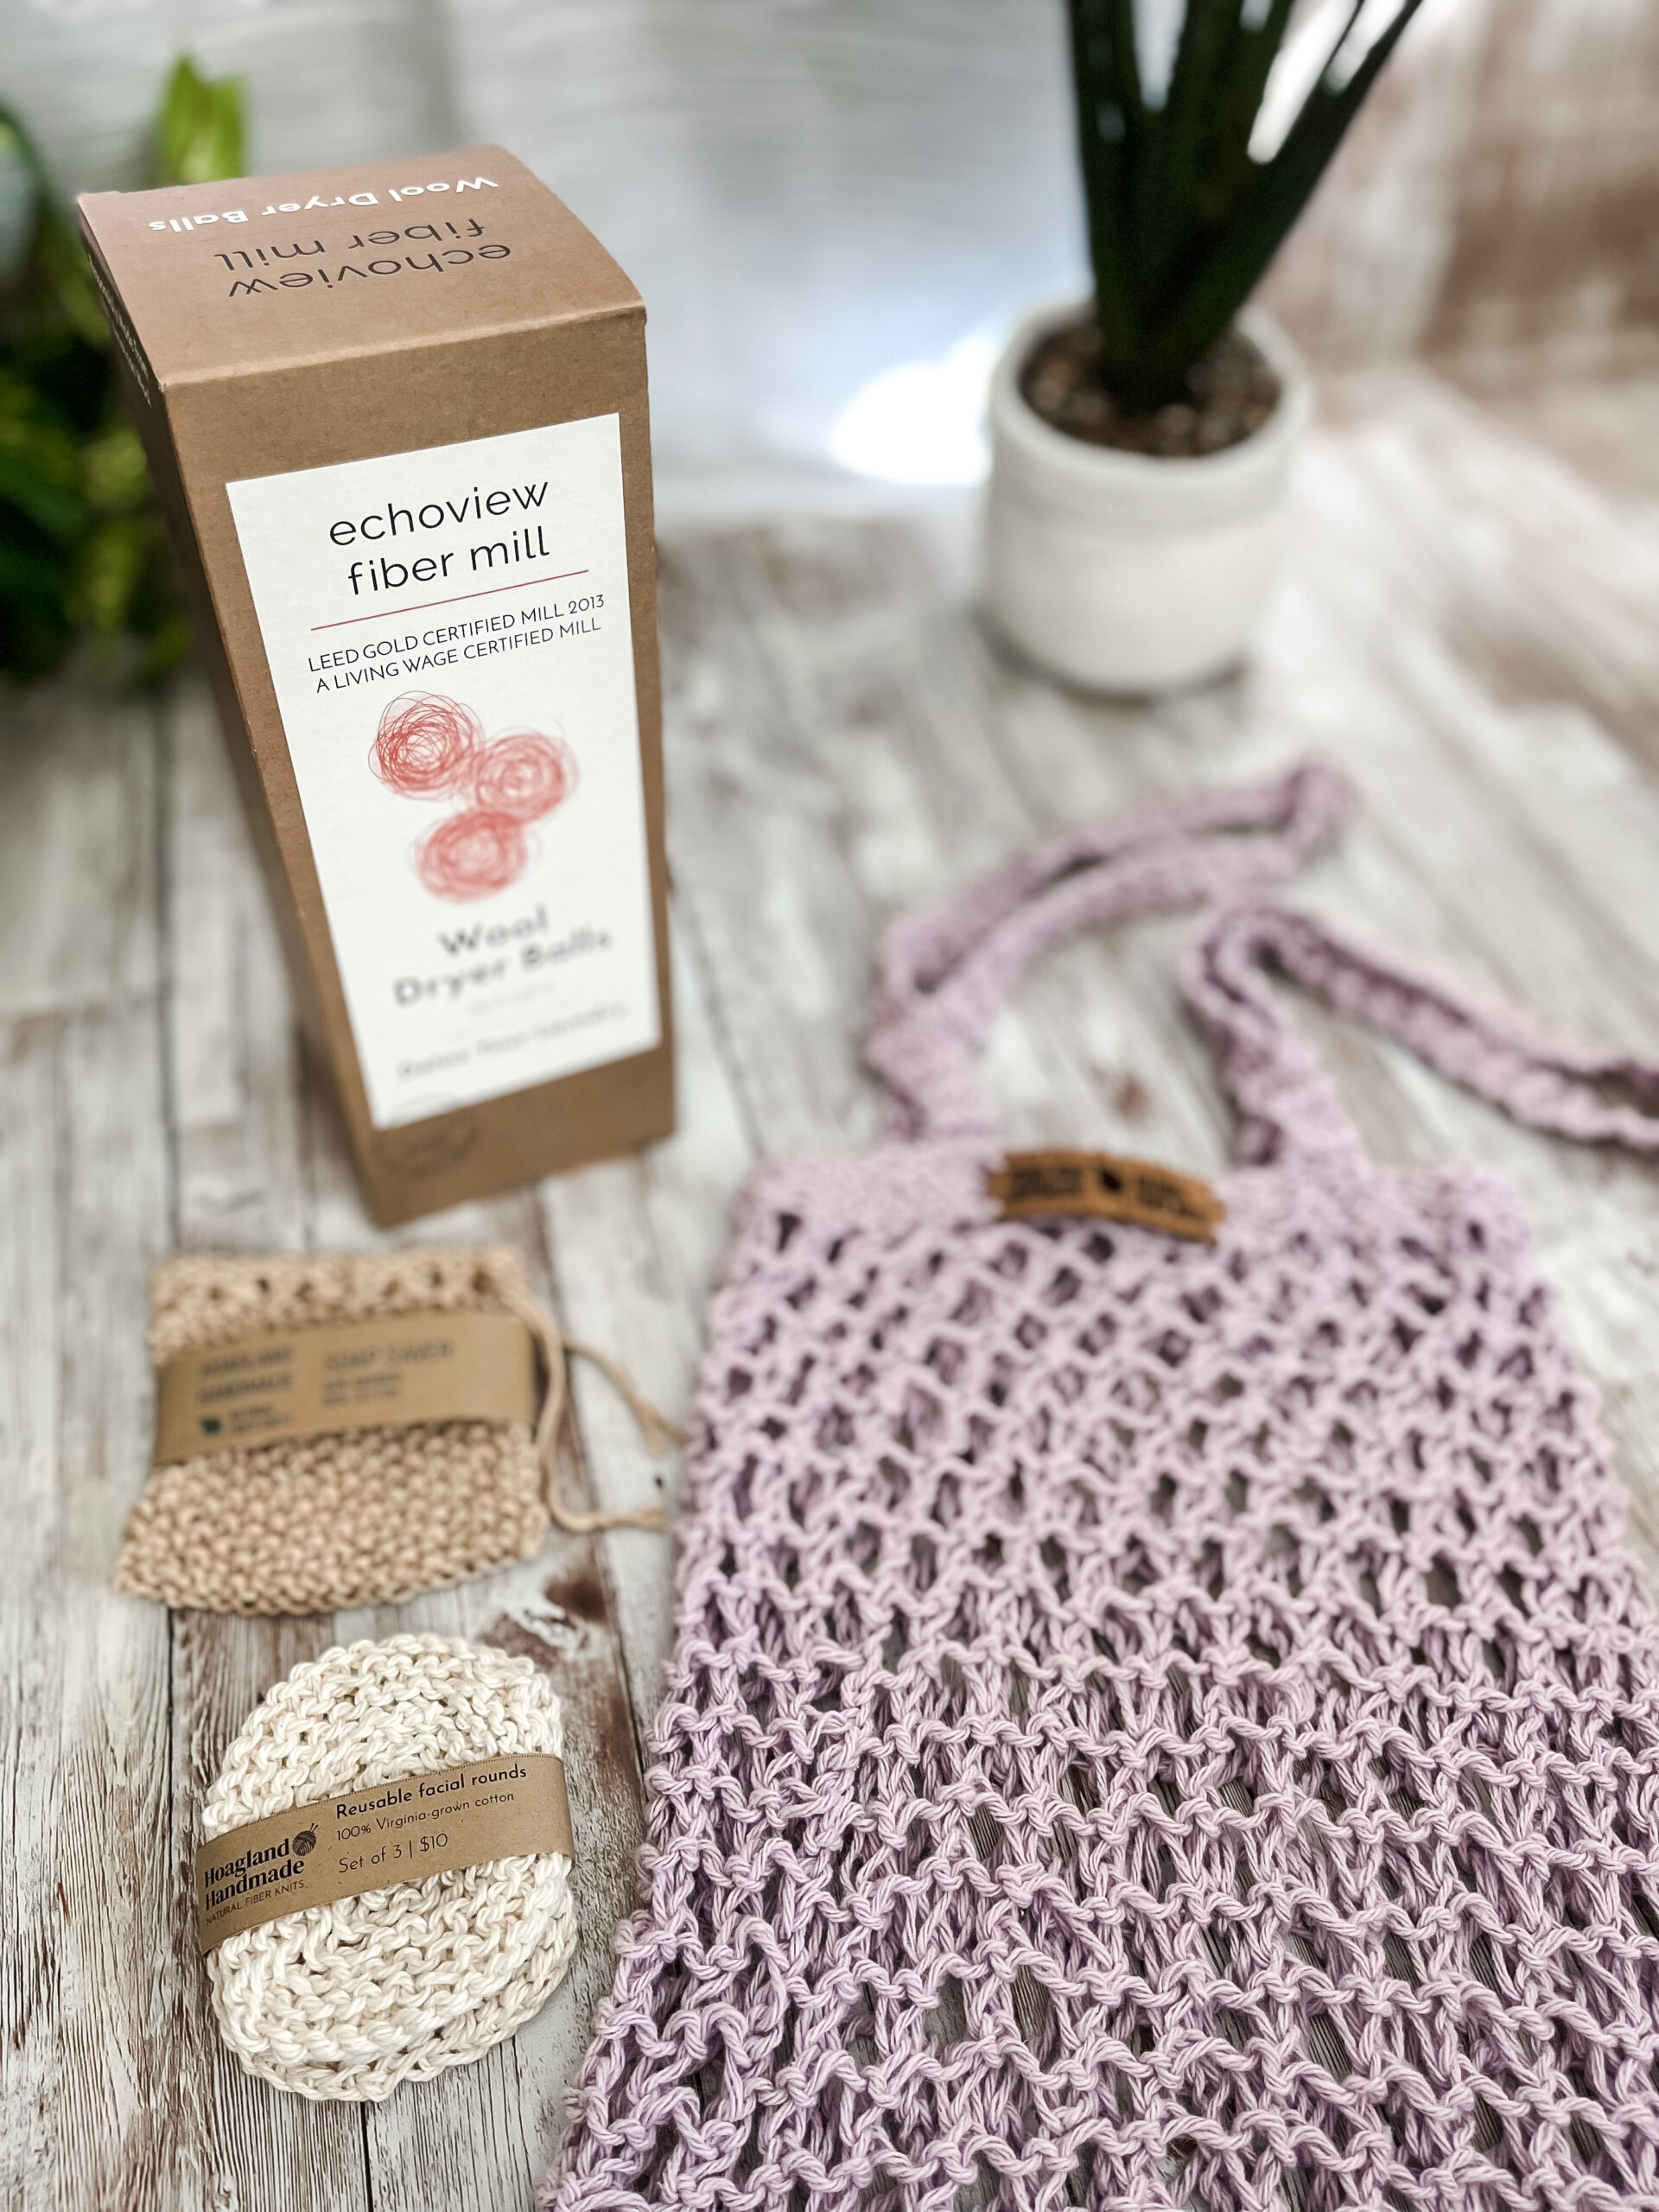 The Zero Waste gift set is pictured showing a box of 3 US Wool dryer balls, a tan bamboo/cotton soap saver pouch wrapped in a kraft paper label from Hoagland Handmade, a set of 3 usable facial rounds knit from Virginia-grown cotton and wrapped in a a kraft paper label from Hoagland Handmade, and a purple recycled cotton knit market tote